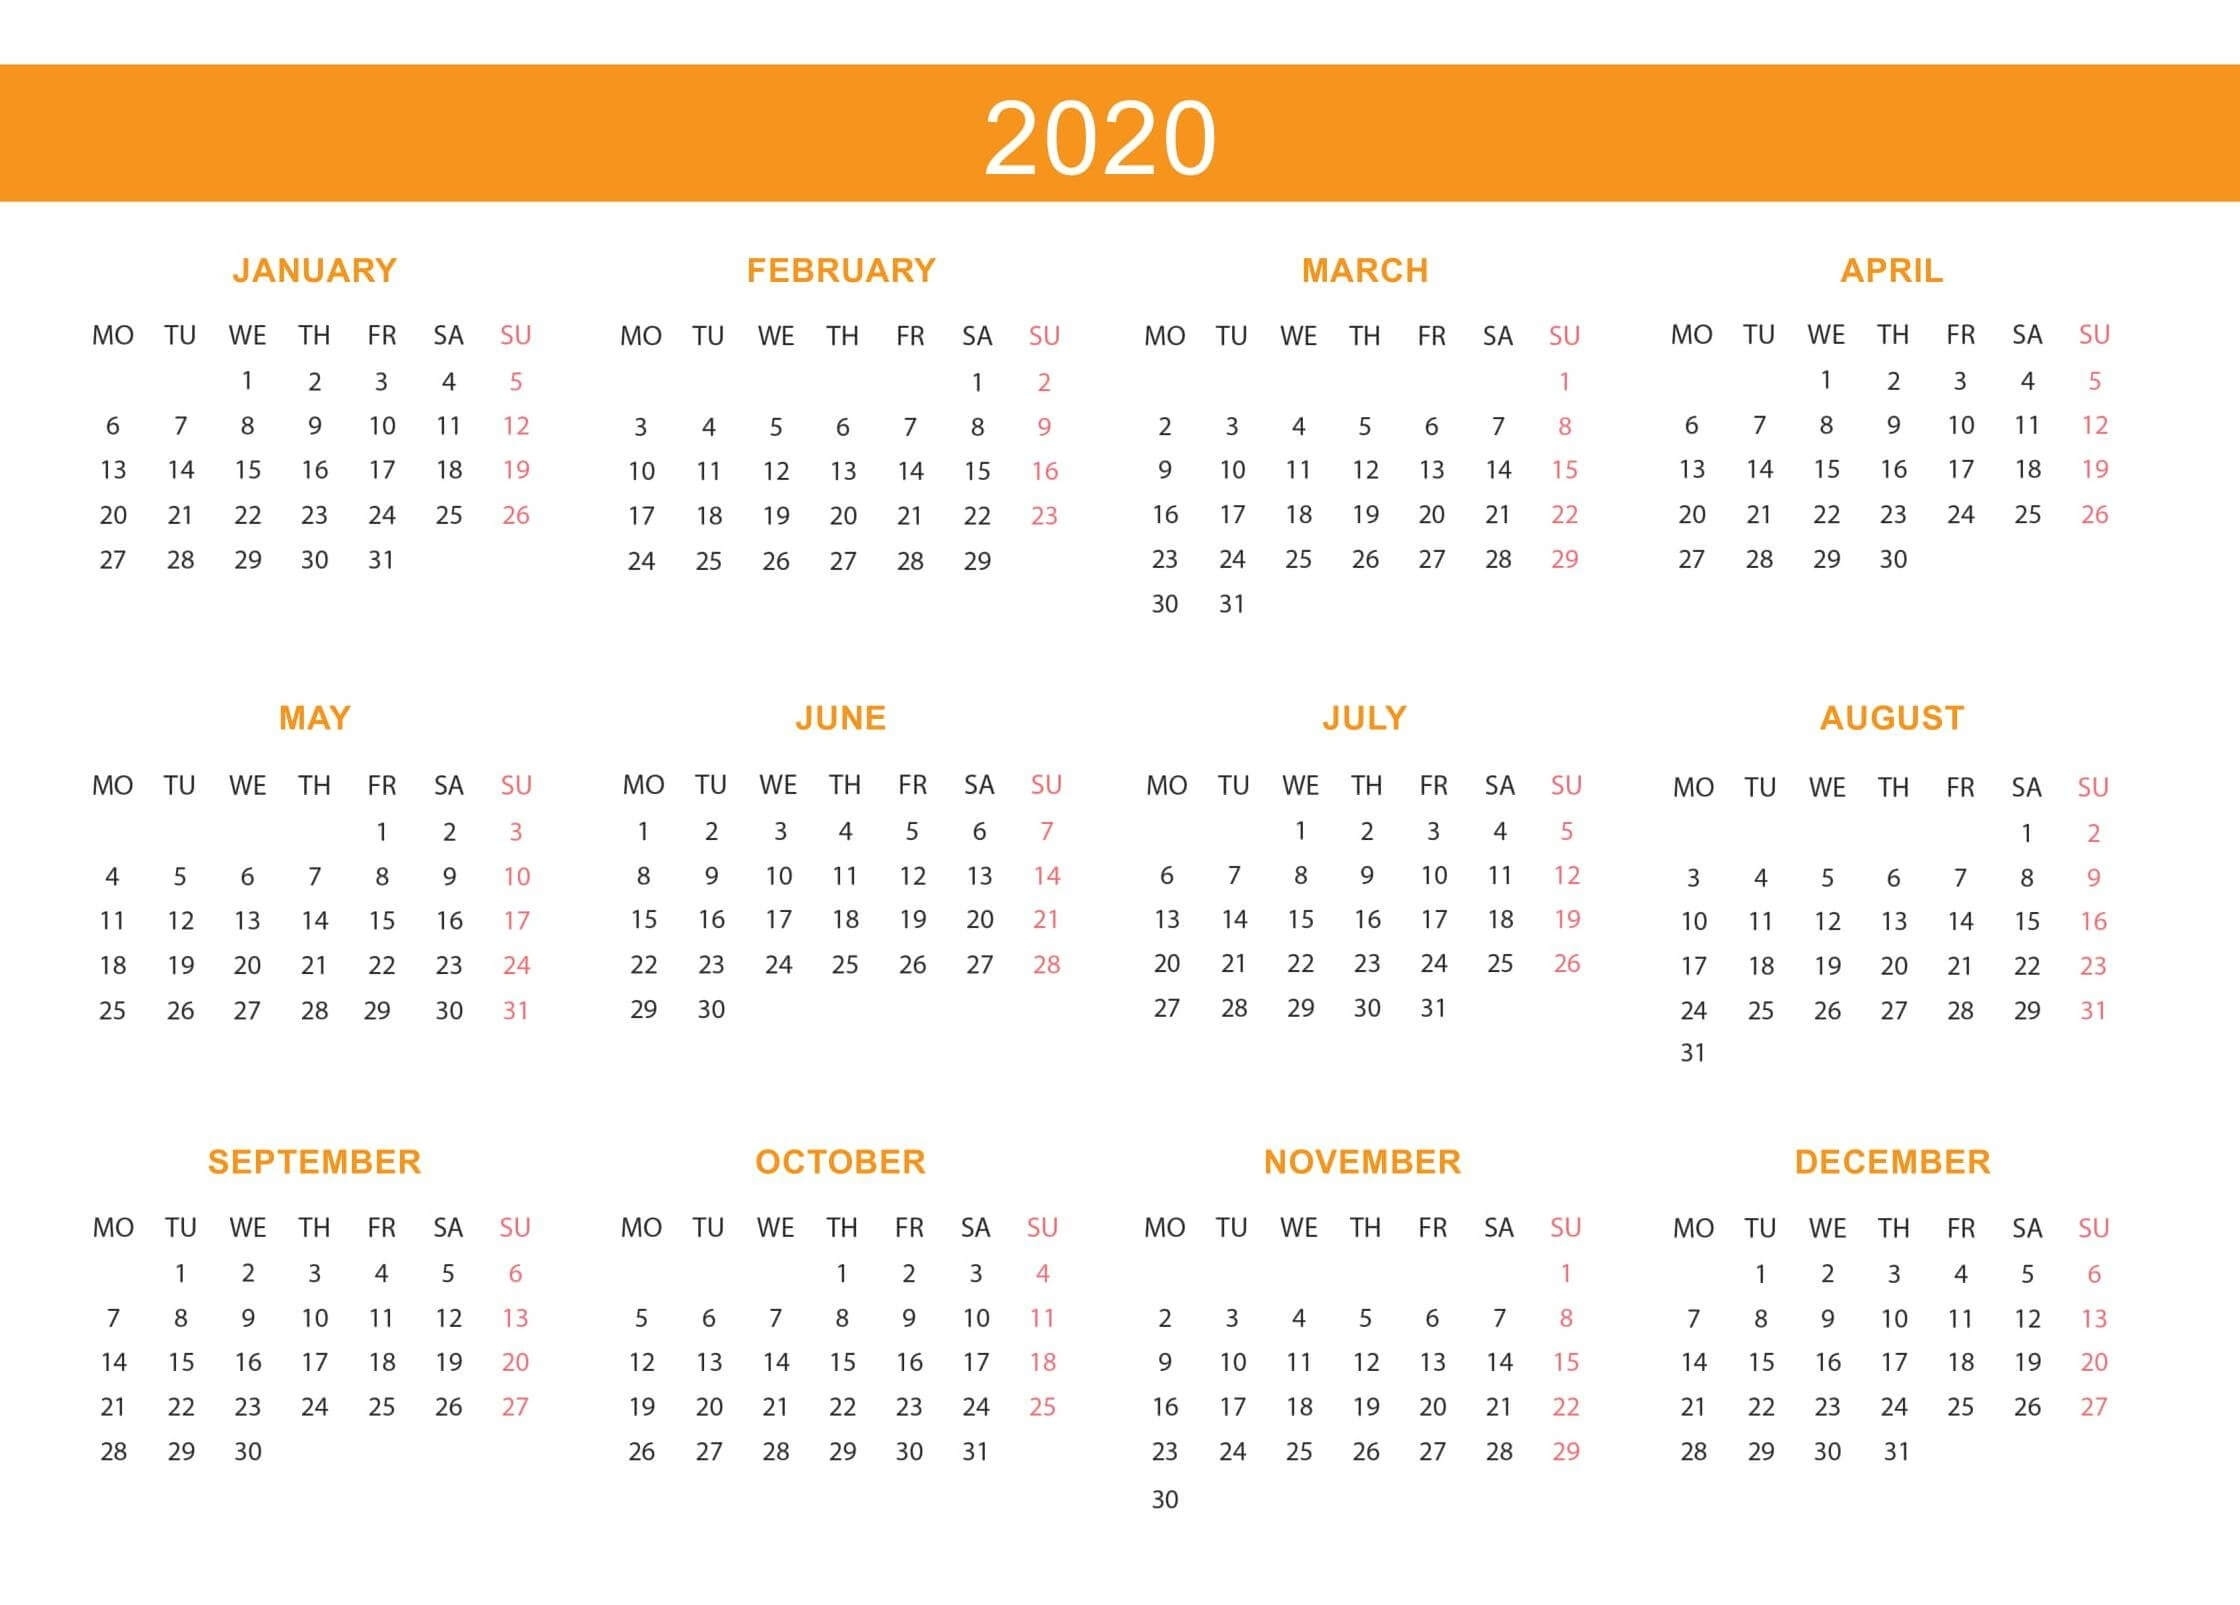 Free Yearly Calendar 2020 With Notes - 2019 Calendars For Free Printable Calenders 2020 South Africa